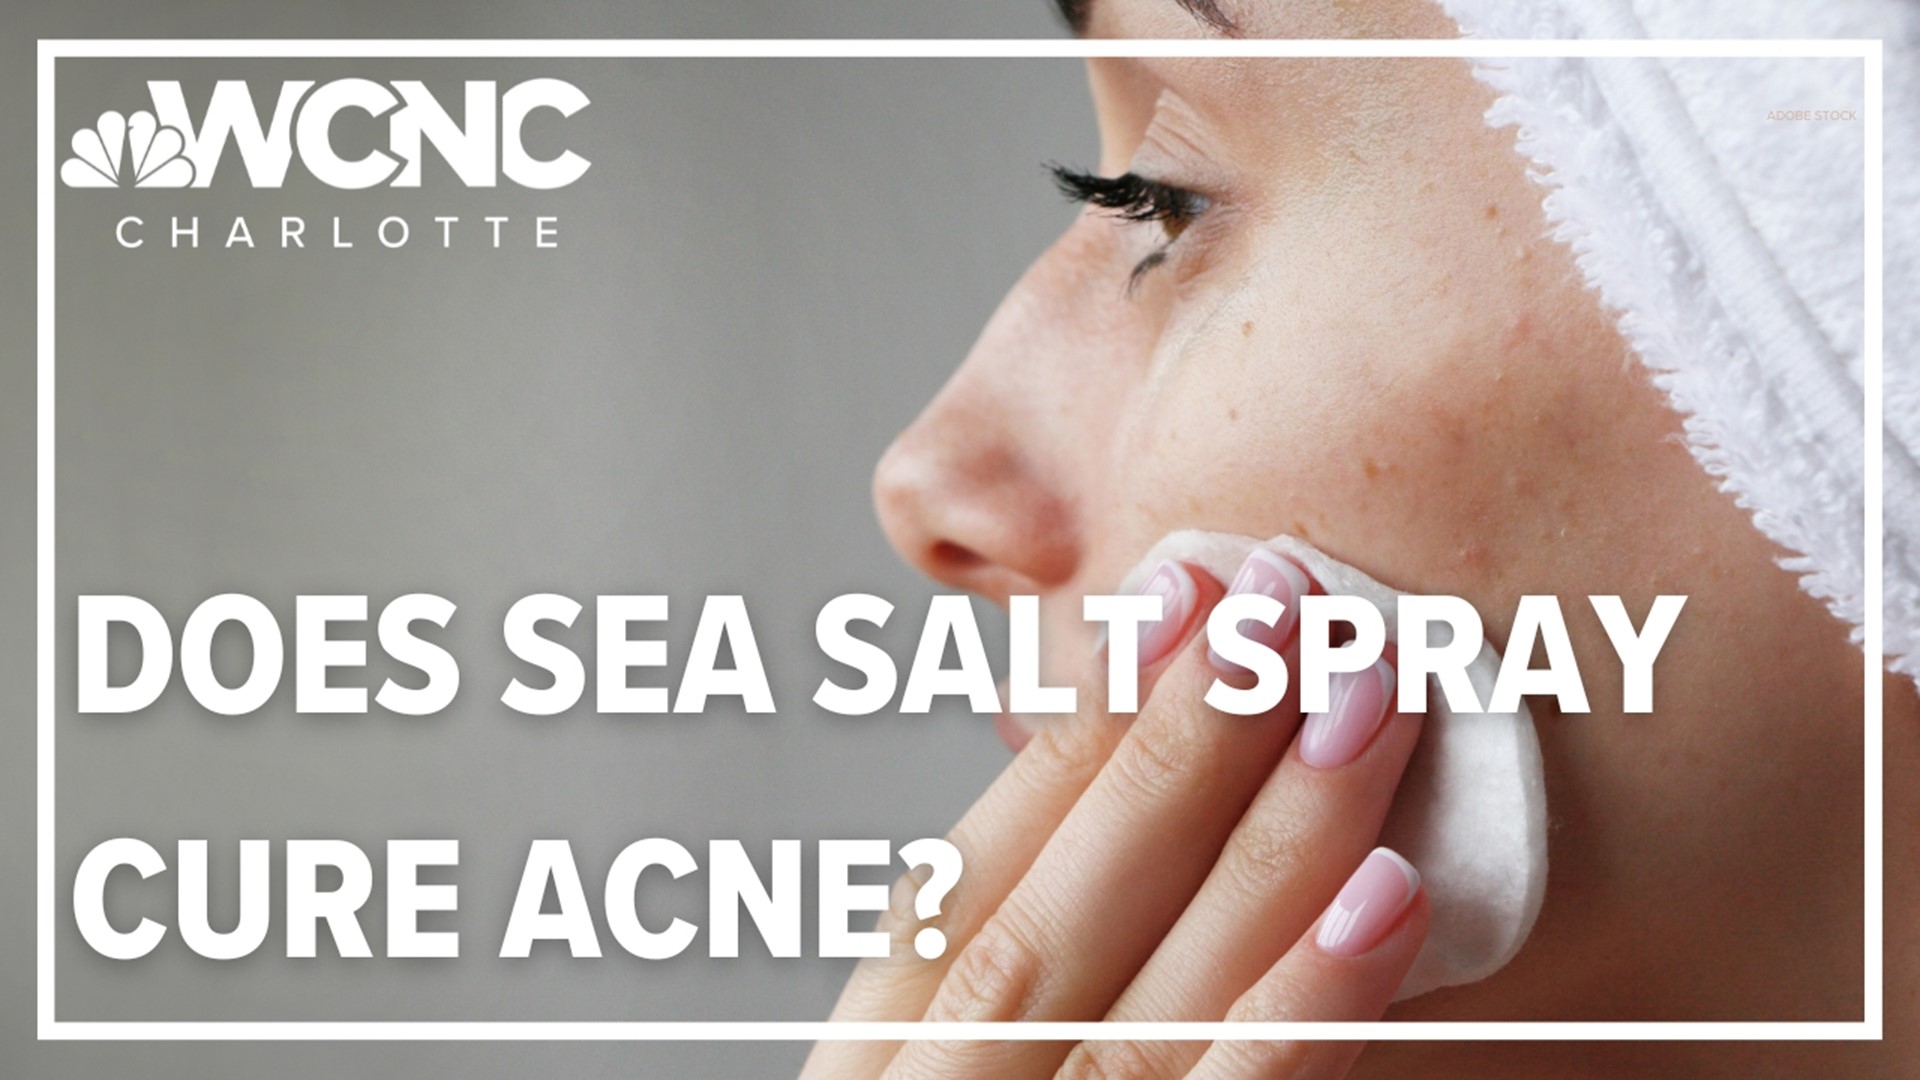 The American Academy of Dermatology Association lists diagnosis and treatment for all types of acne, and sea salt spray is not on that list.